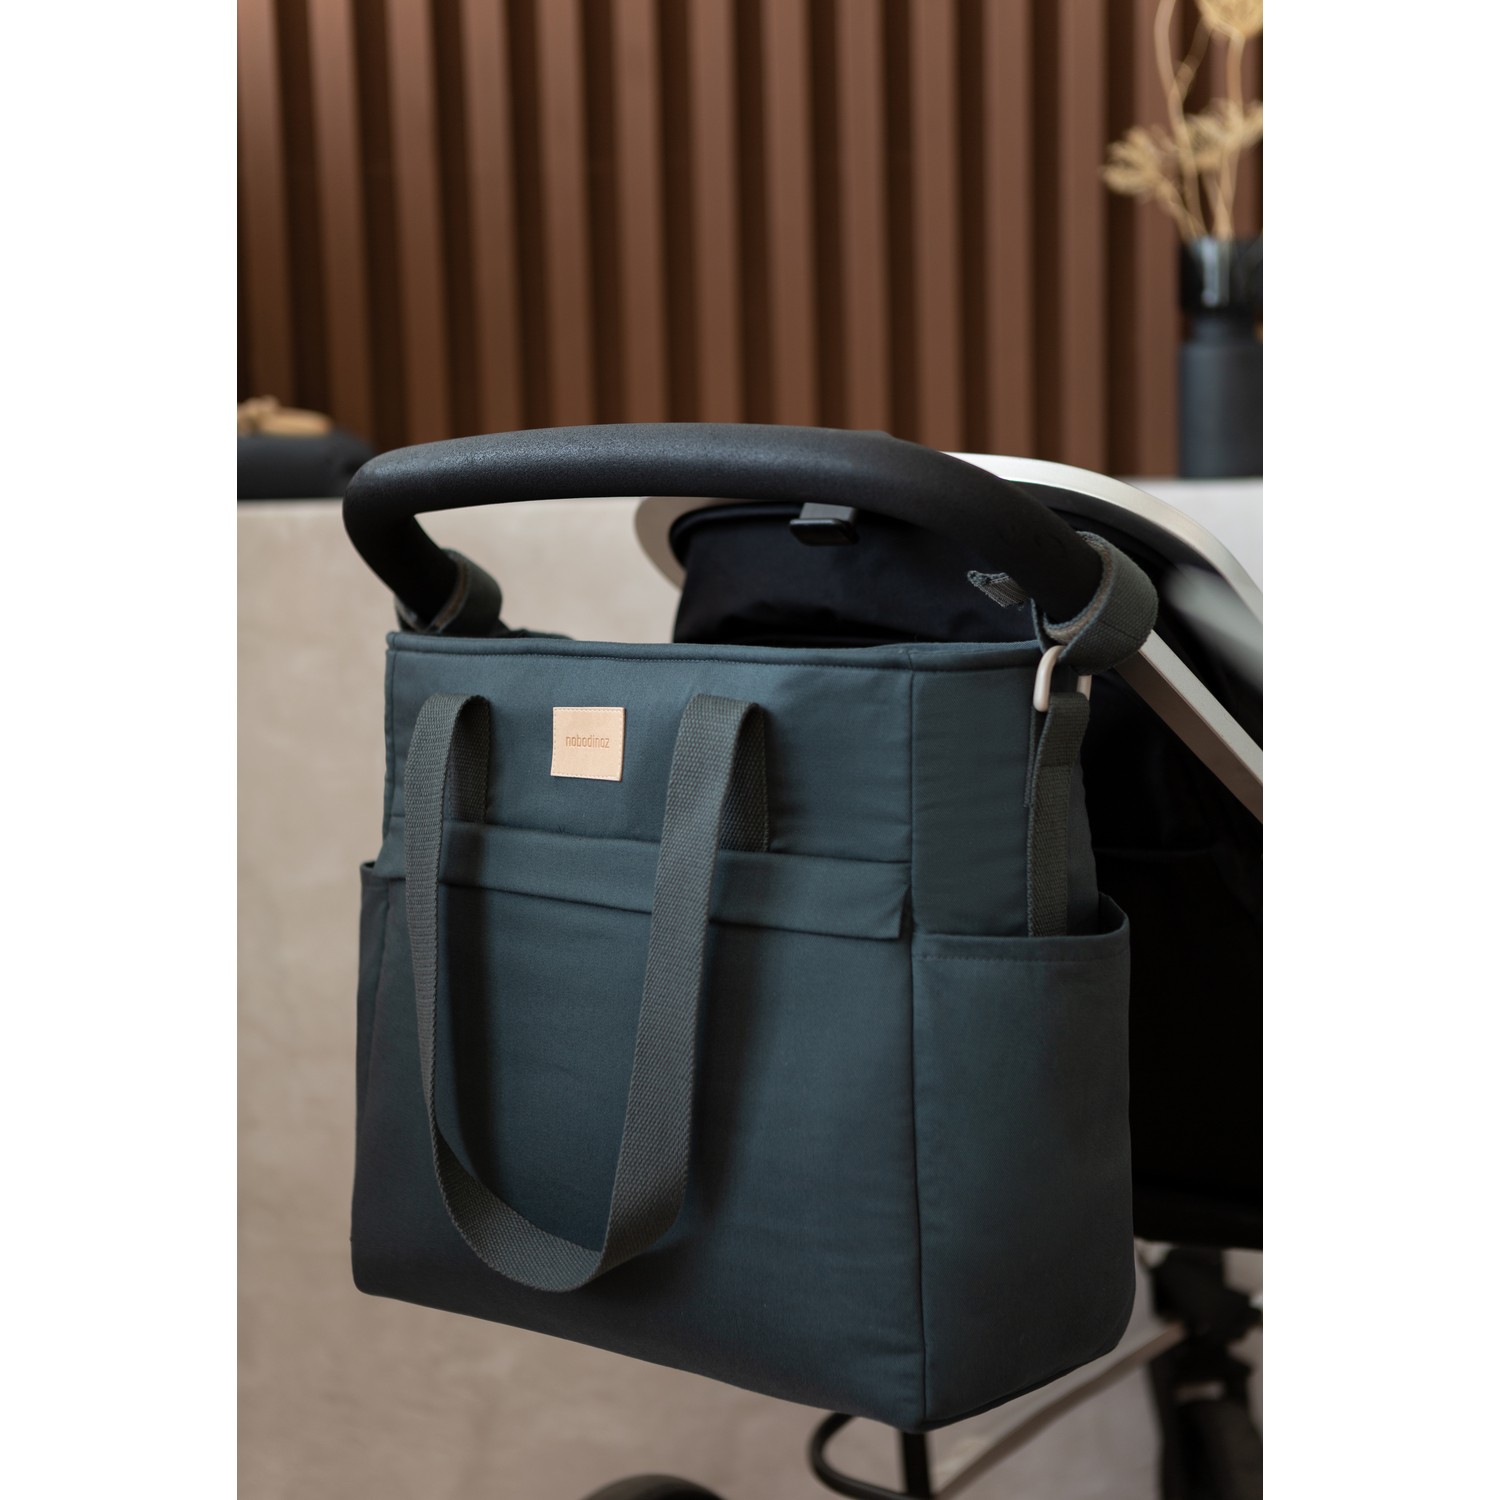 sac-a-langer-baby-on-the-go-carbon-blue-nobodinoz.fq4k9d.max